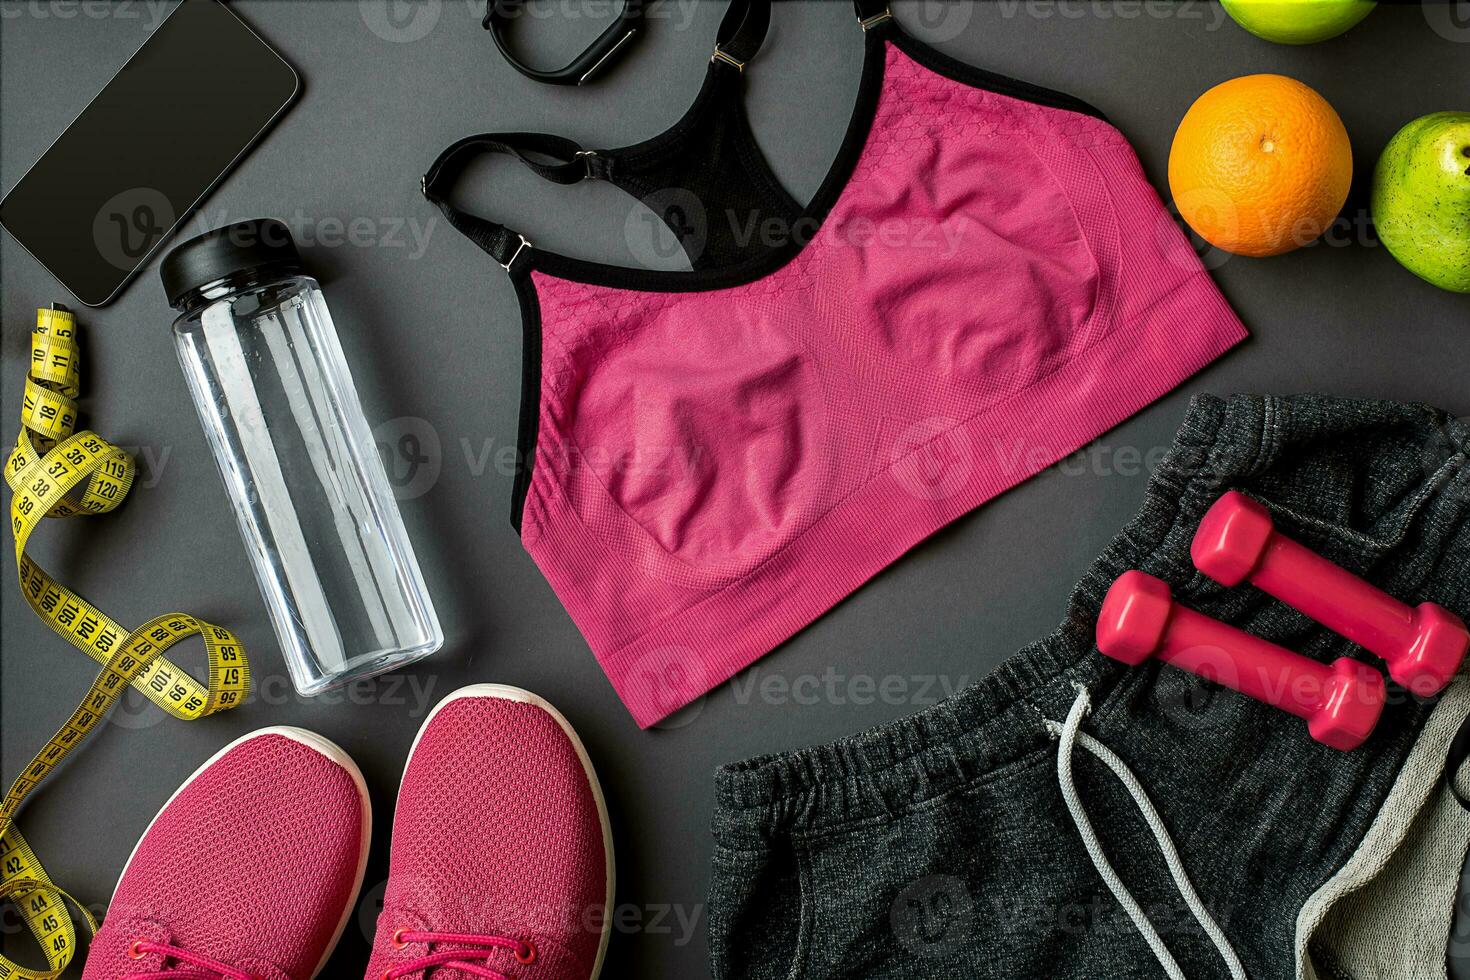 Athlete's set with female clothing, sneakers and bottle of water on gray background photo